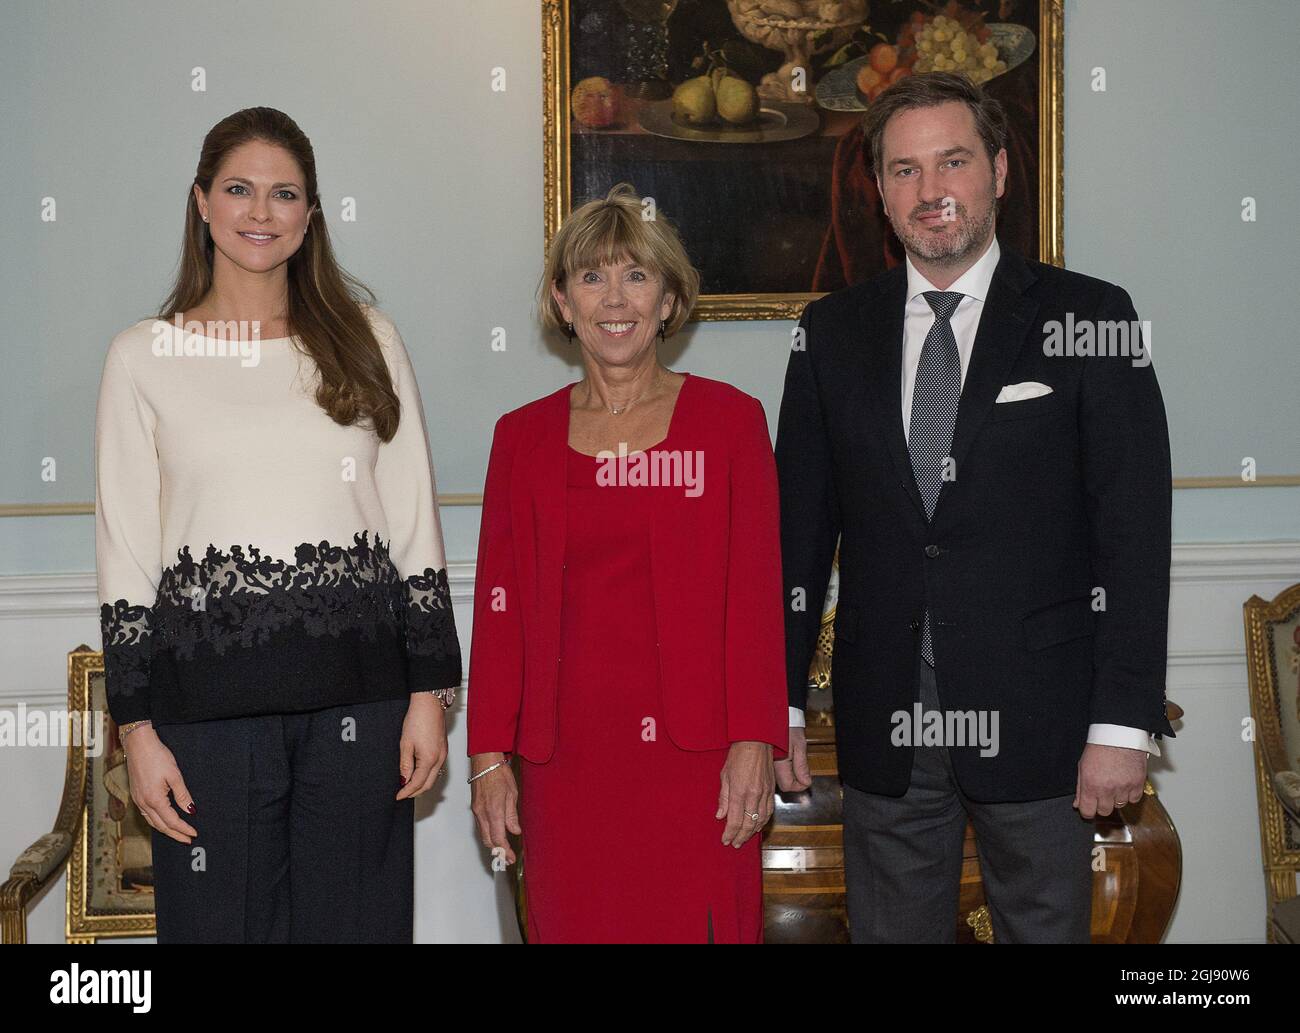 GAVLE 2015-02-02 Princess Madeleine, County General Barbro Holmberg and Christopher OÂ´Neill are seen during the prince couples visit to Gavle, Sweden, February 2, 2015. . Foto: Jonas Ekstromer / TT / kod 10030  Stock Photo